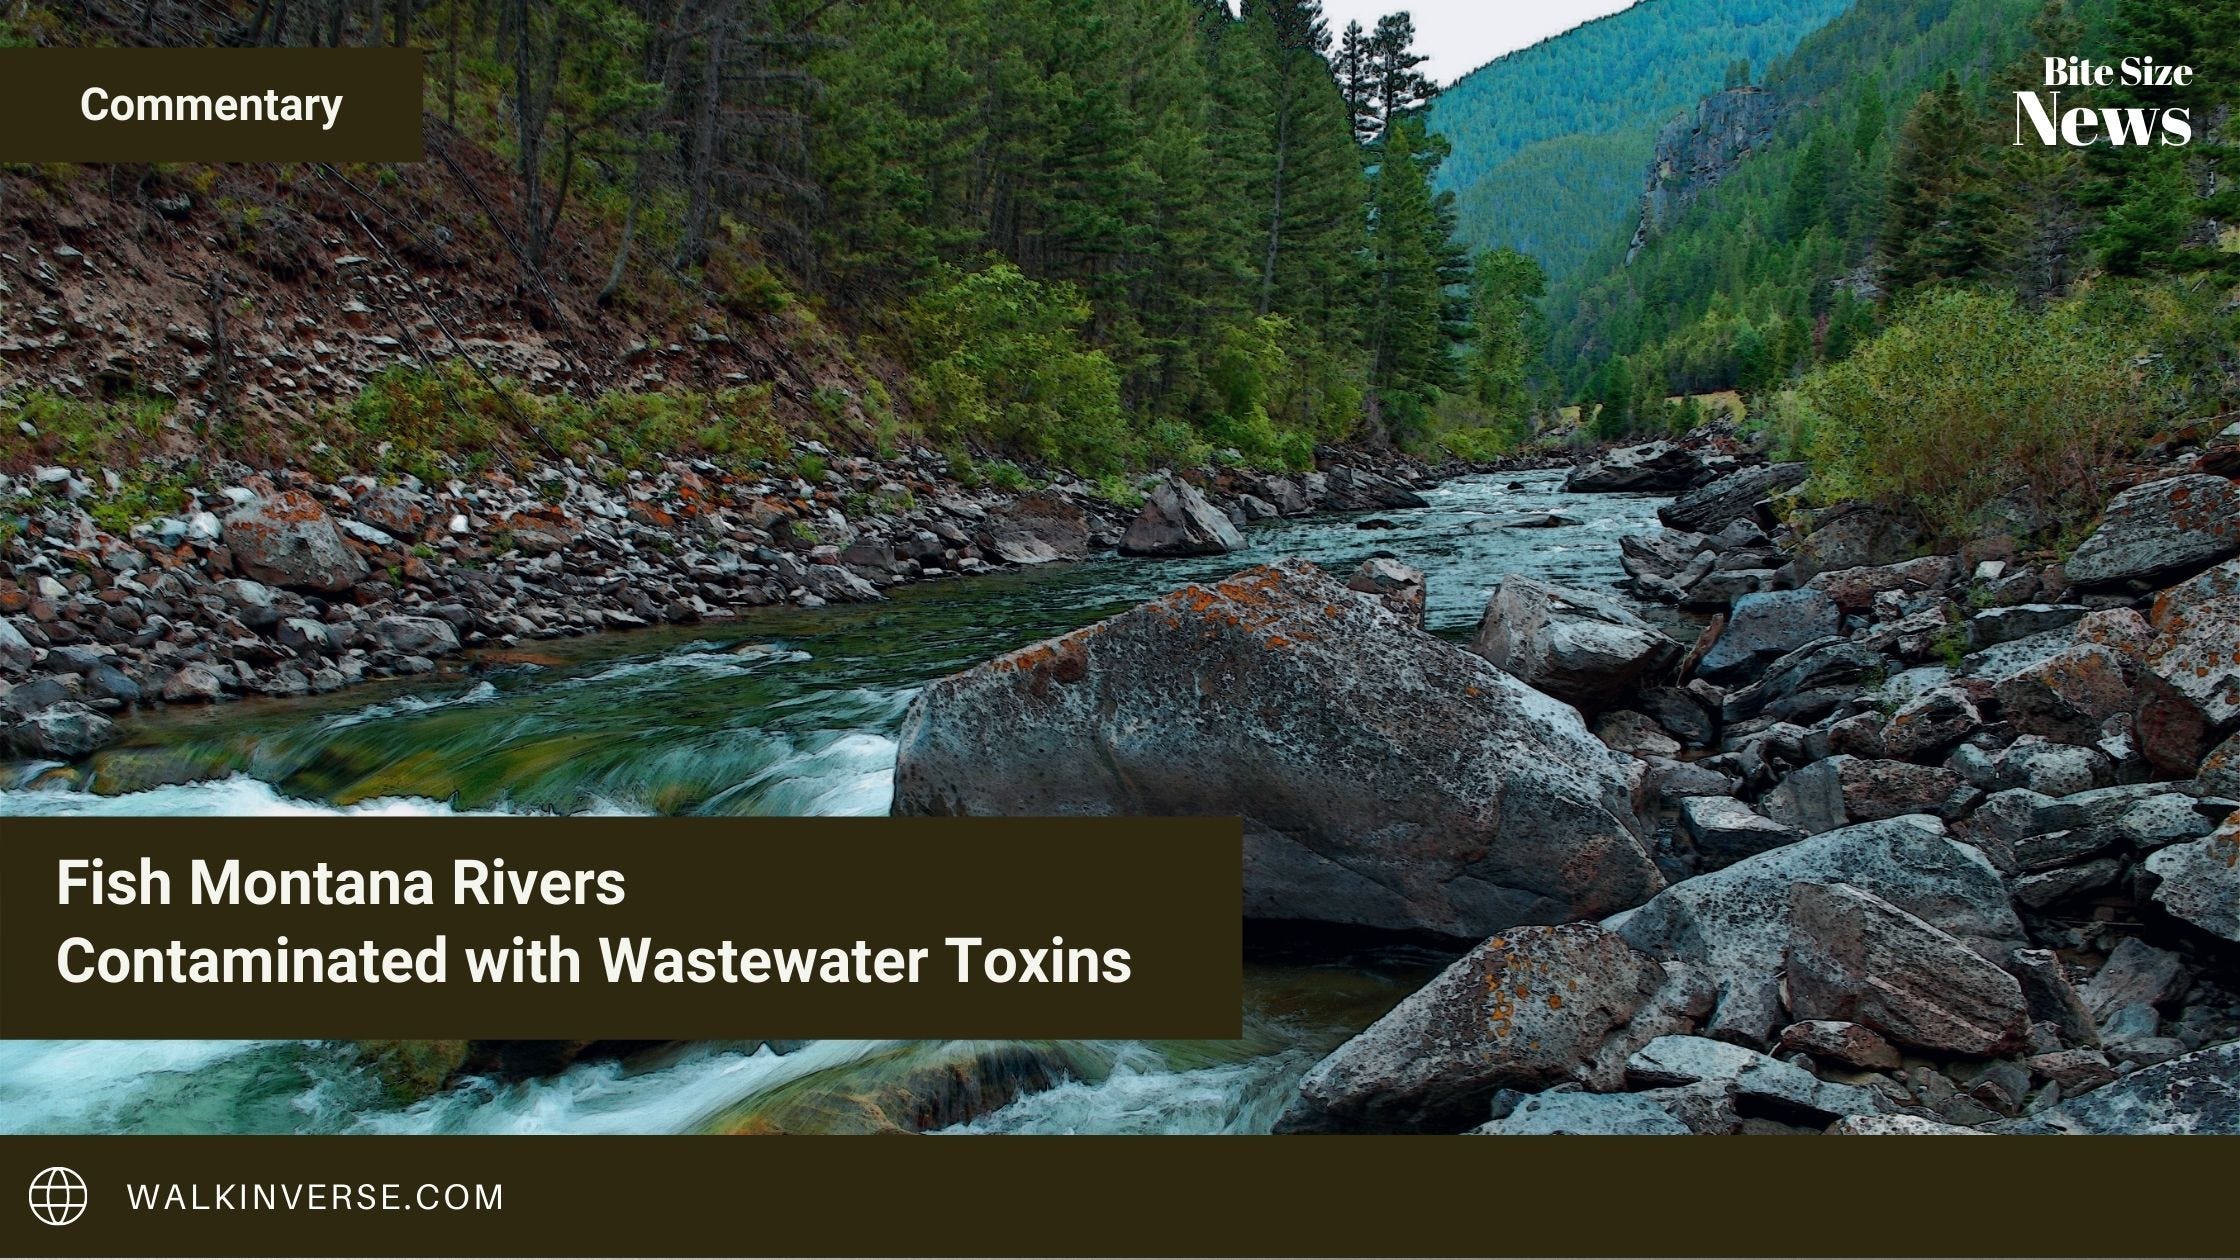 Big Sky Montana Rivers Contaminated with Wastewater Toxins